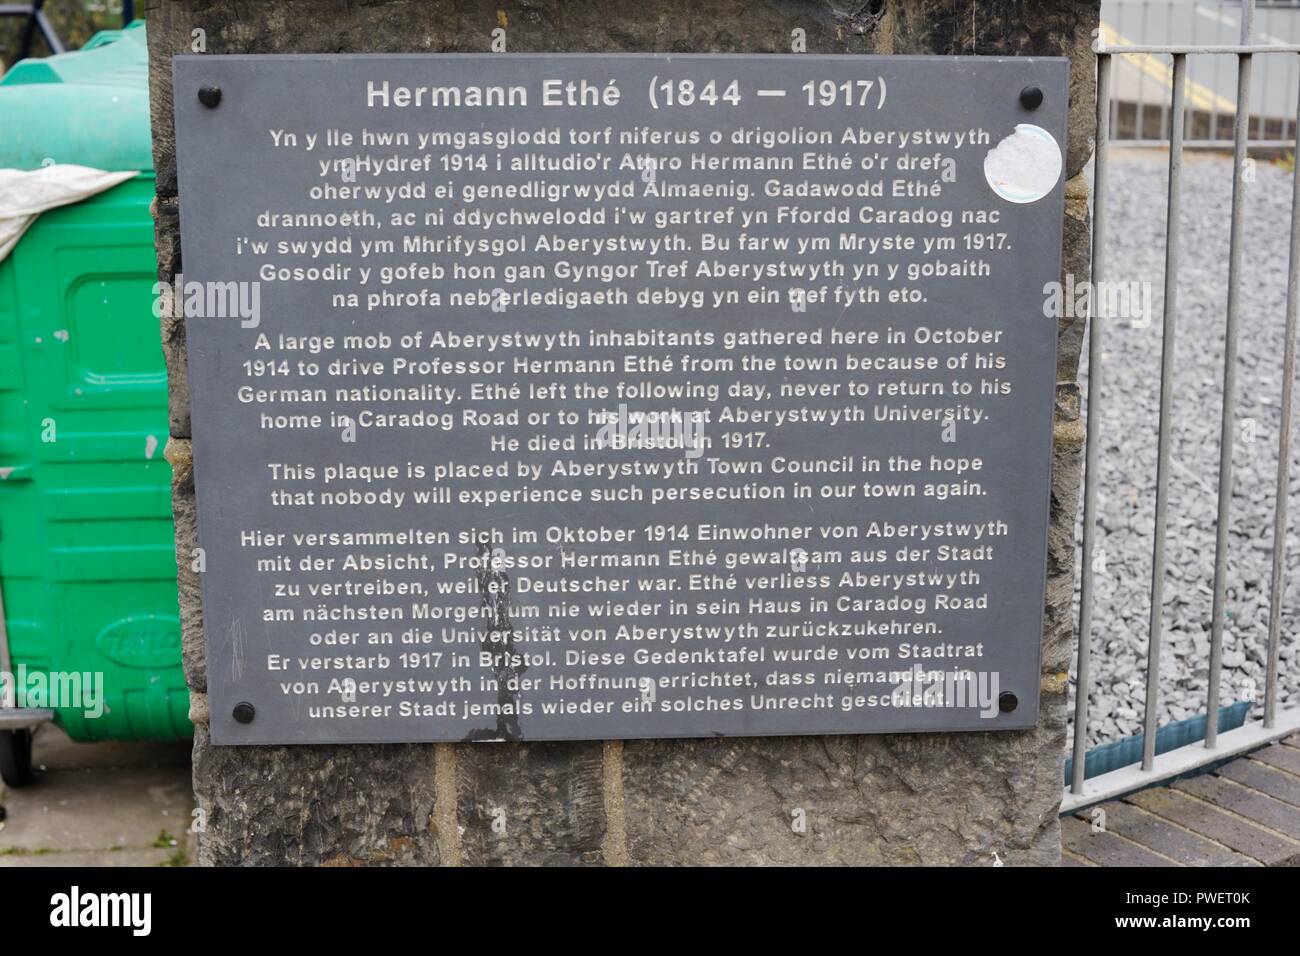 Plaque in Aberystwyth town commemorating the life of Hermann Ethe, driven from the town by an anti German mob in 1914, Wales, UK. Stock Photo